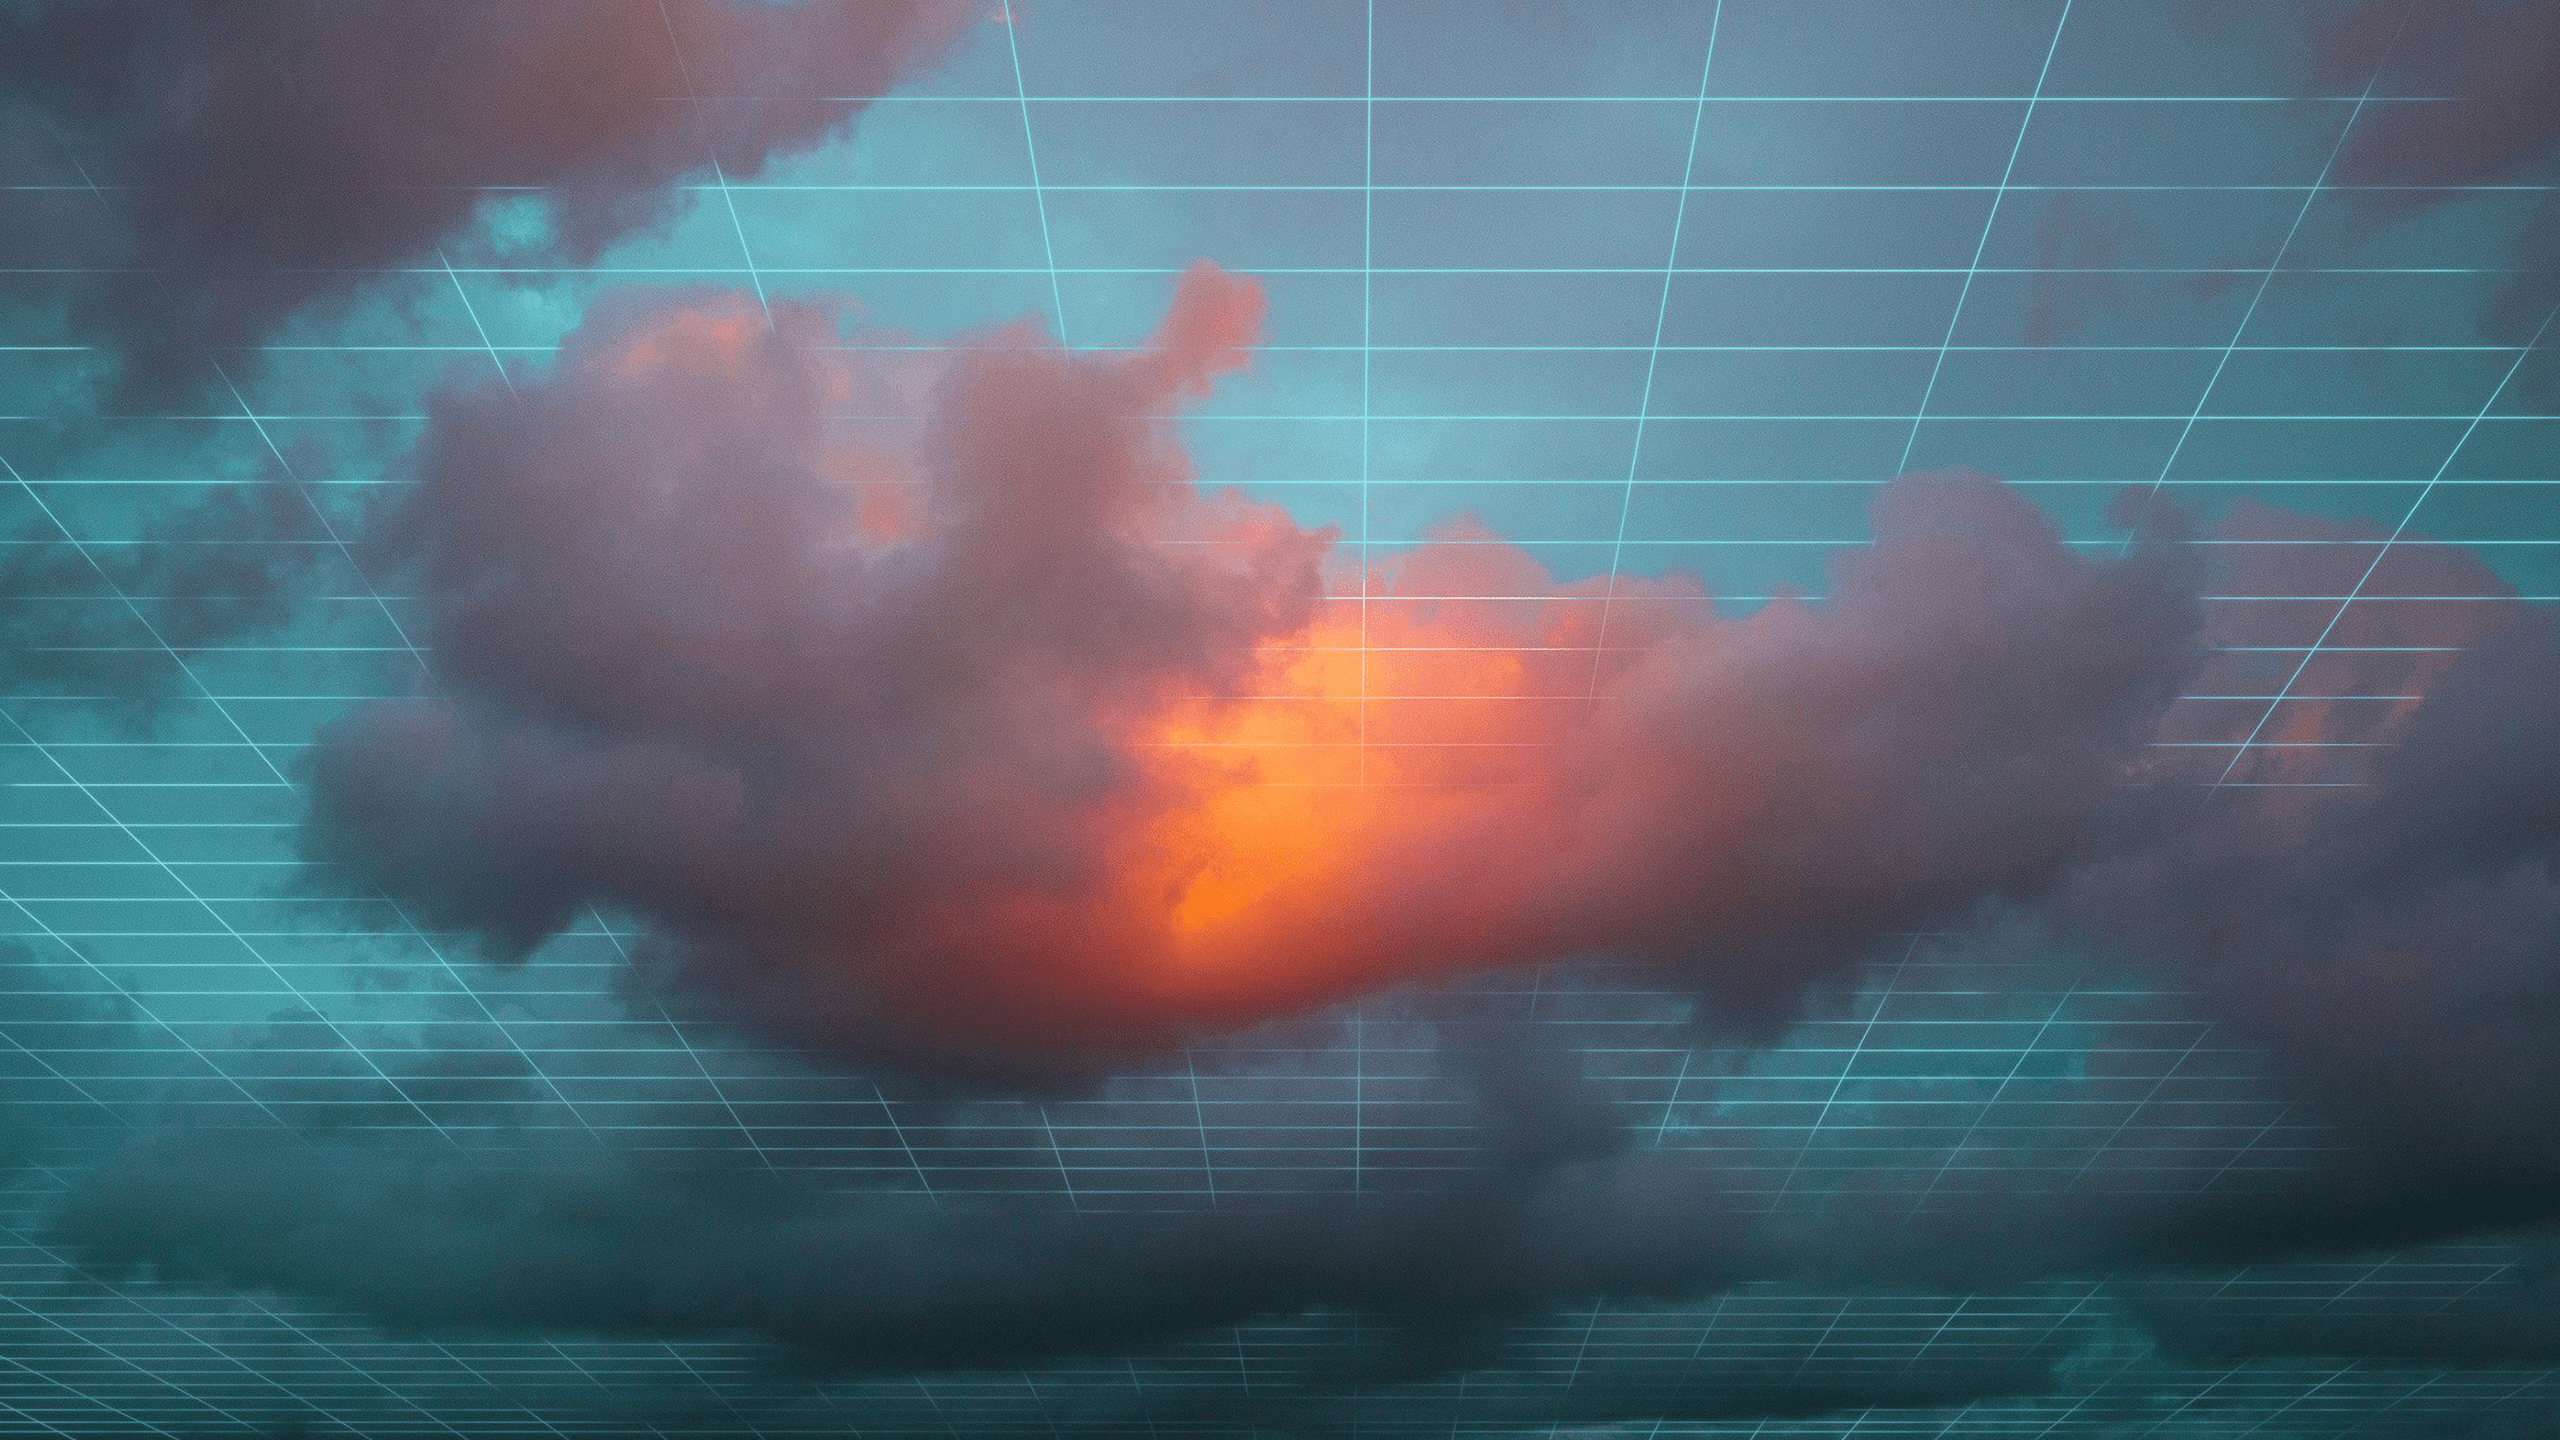 A sunset behind a cloud, with a grid superimposed over the image - Grid